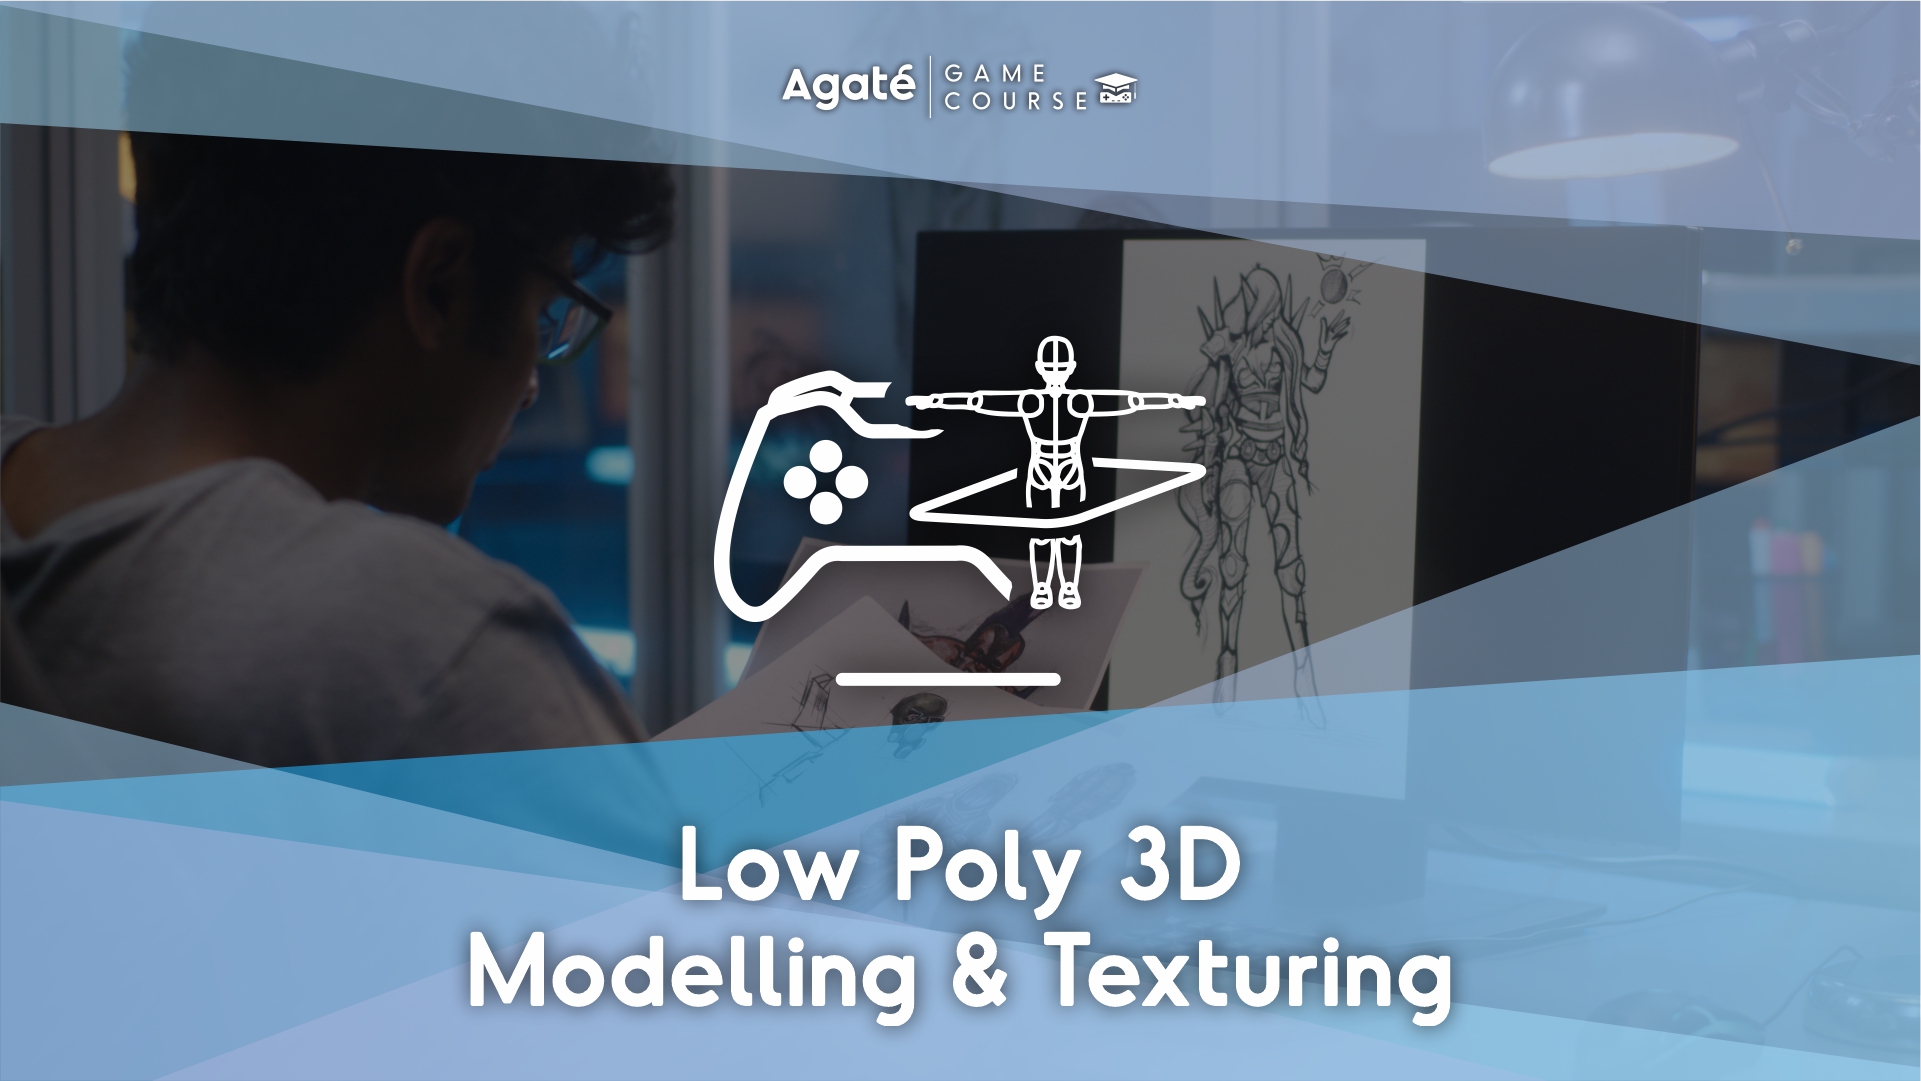 Low Poly 3D Modeling & Texturing Batch 3